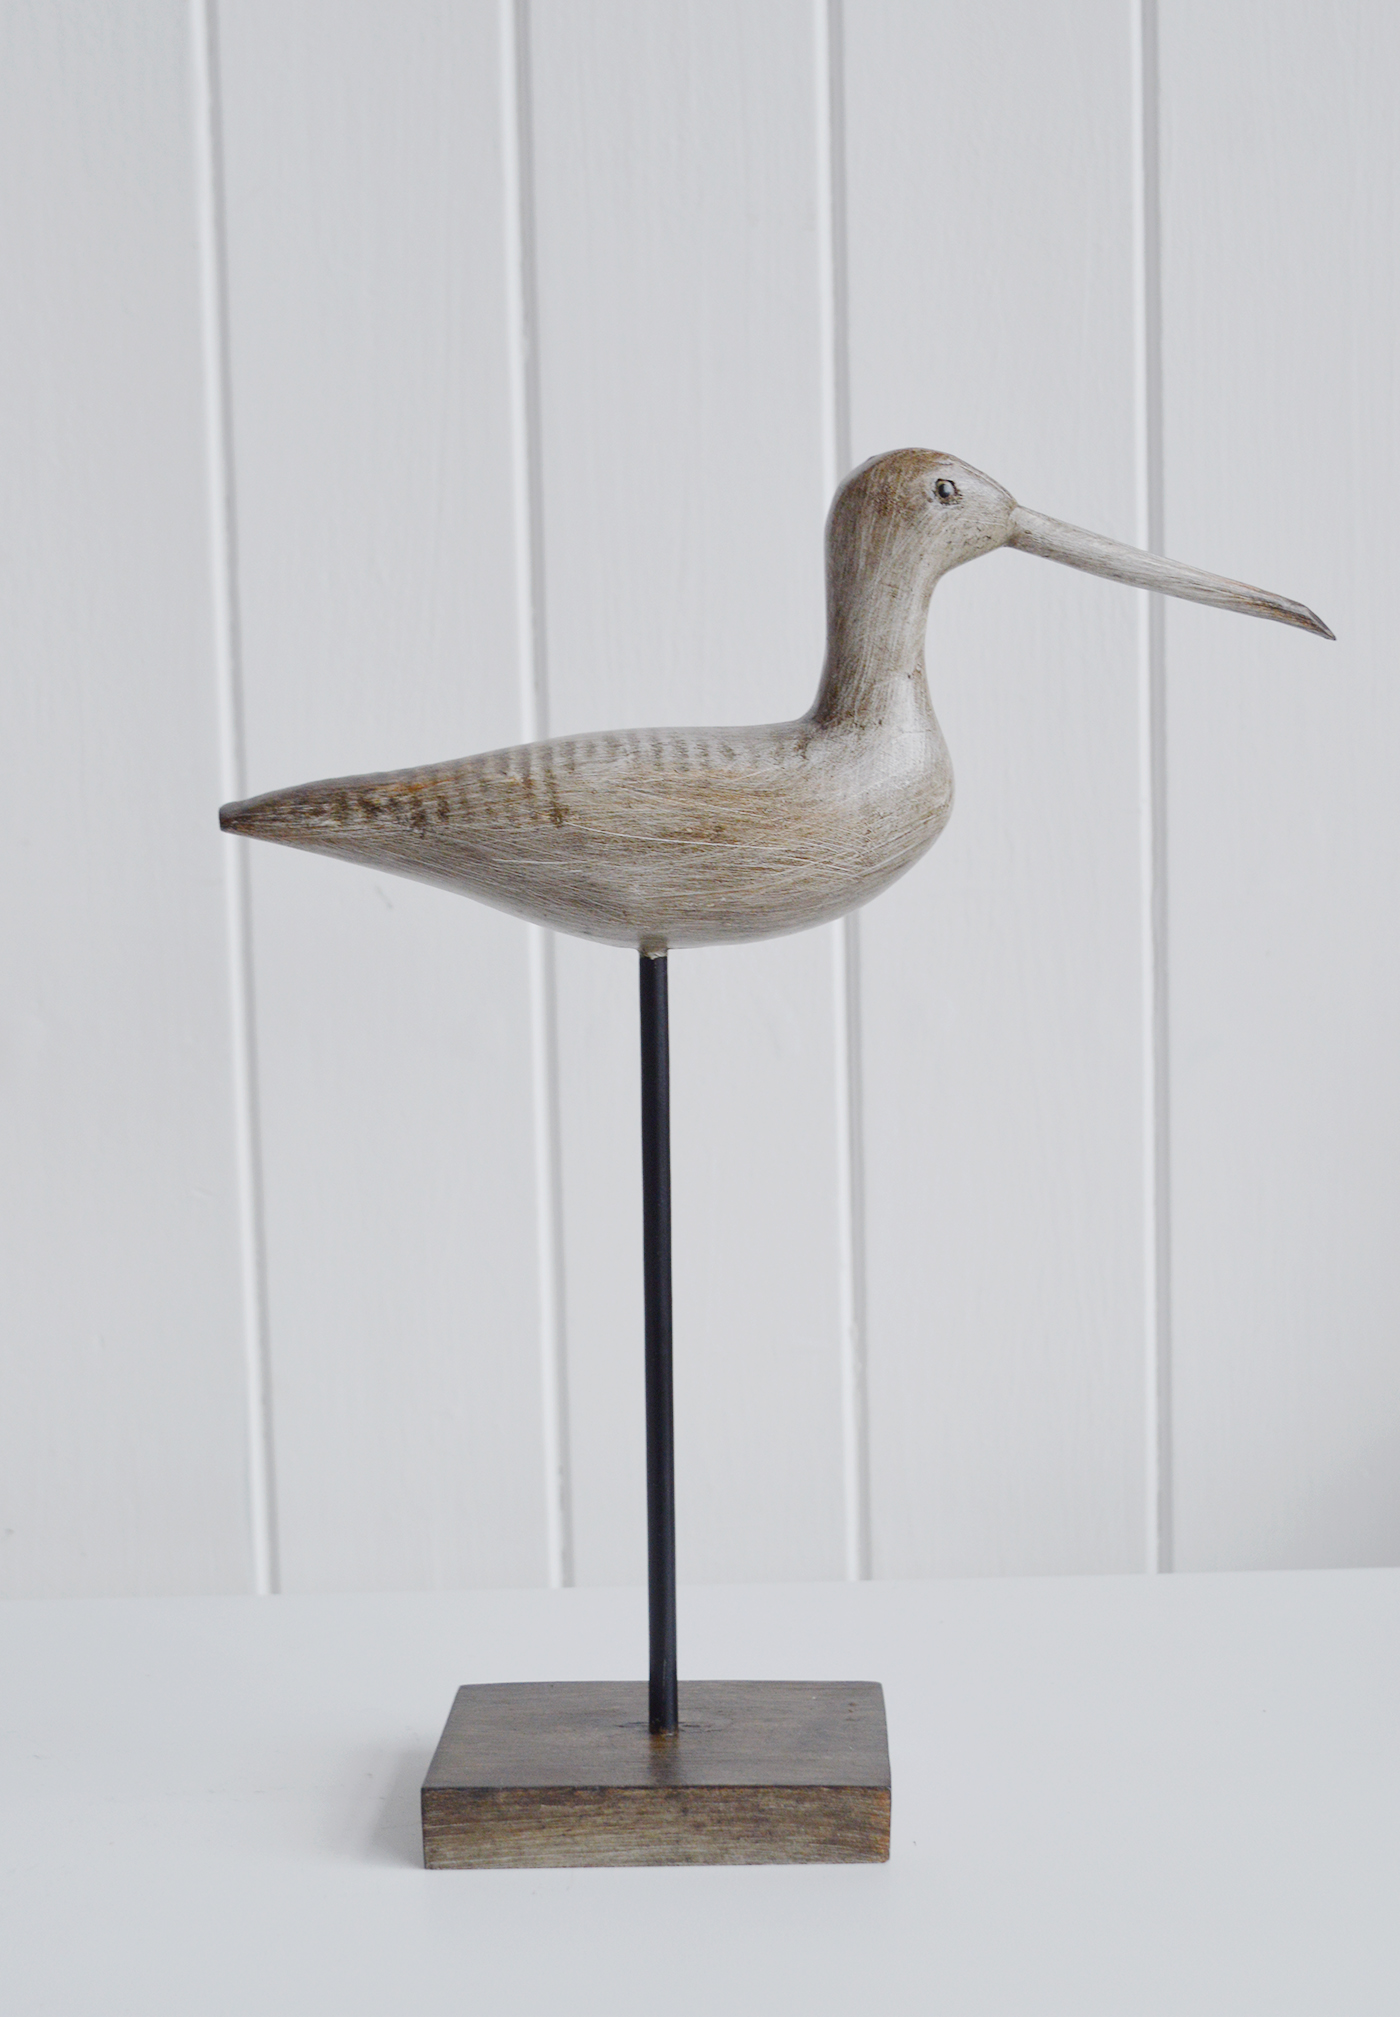 Nautical New England Coastal  Furniture and accessories for the home. A decorative standing seabird from the White Lighthouse Furniture and Home interiors